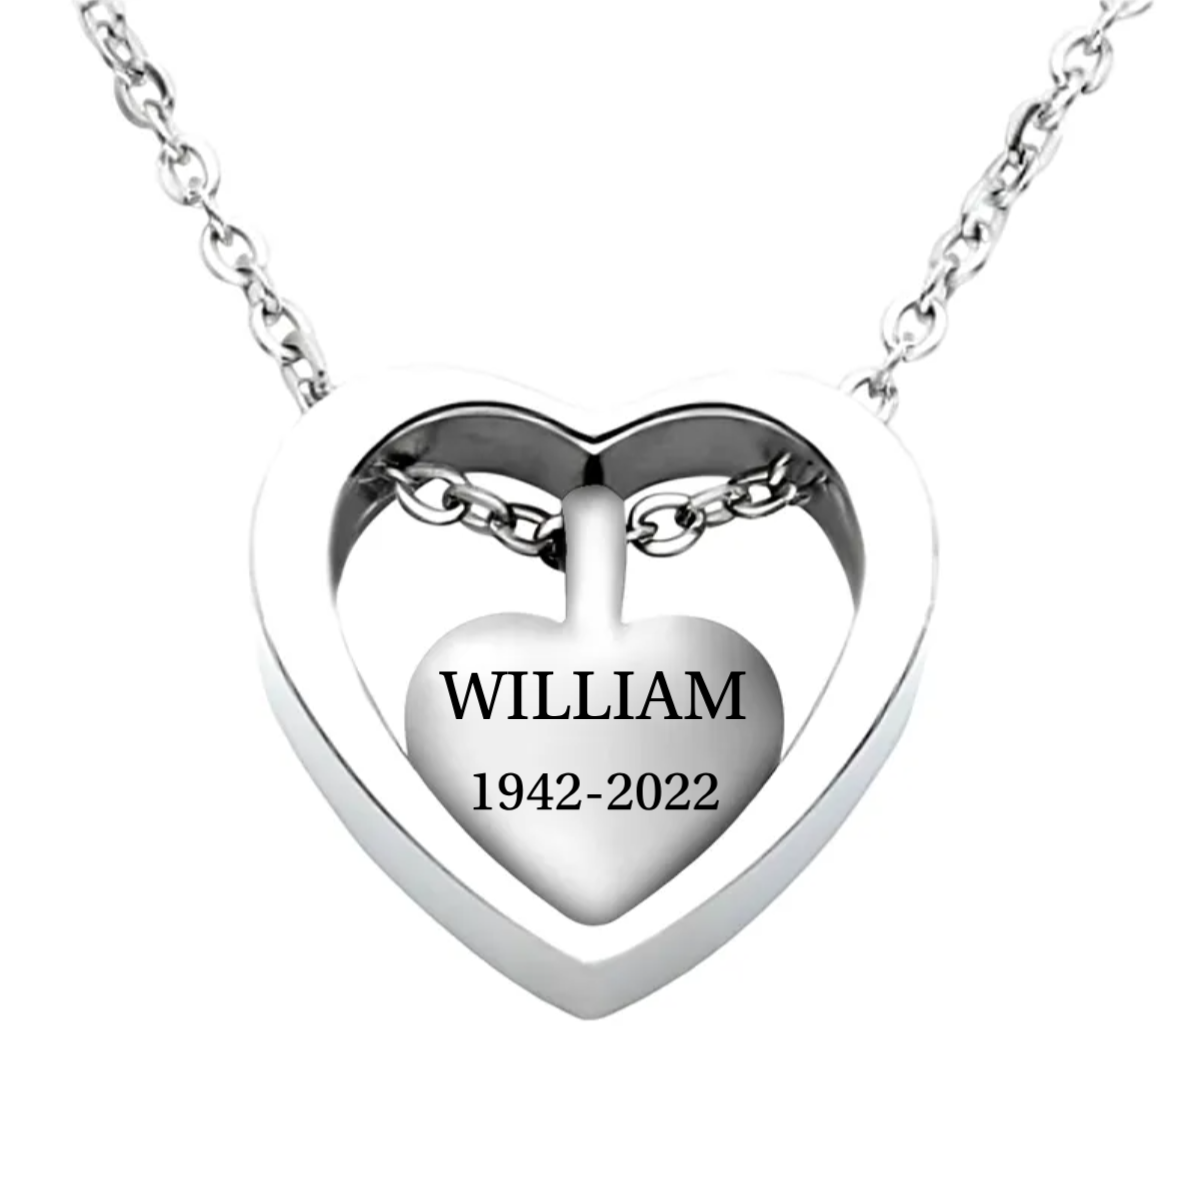 Personalized Cremation Ashes Heart Urn Necklace